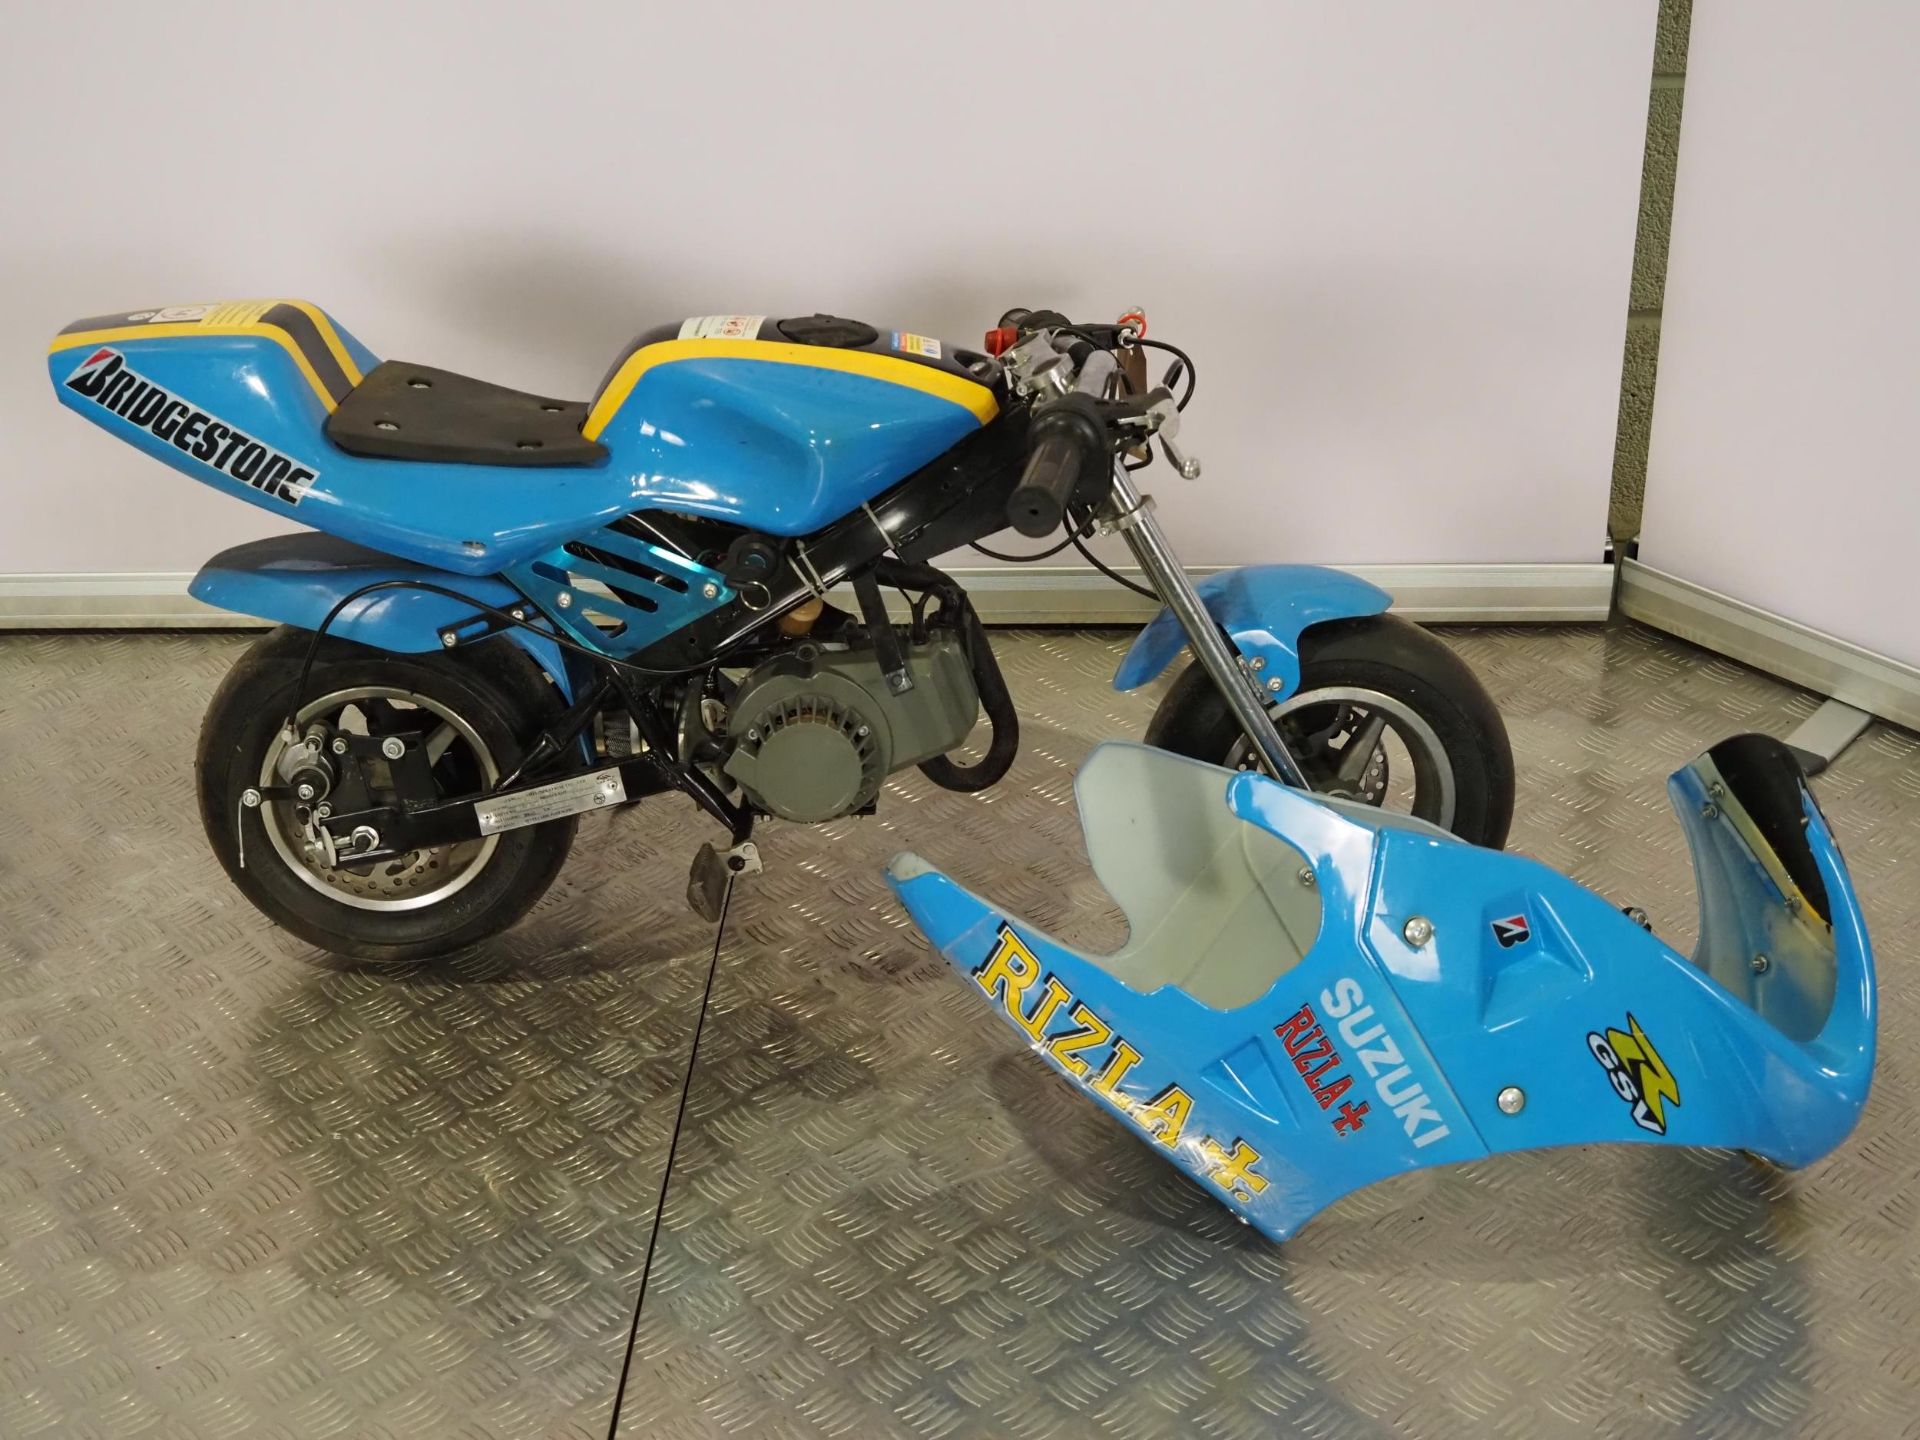 Mini Moto motorcycle in Rizzla blue livery. Runs and rides